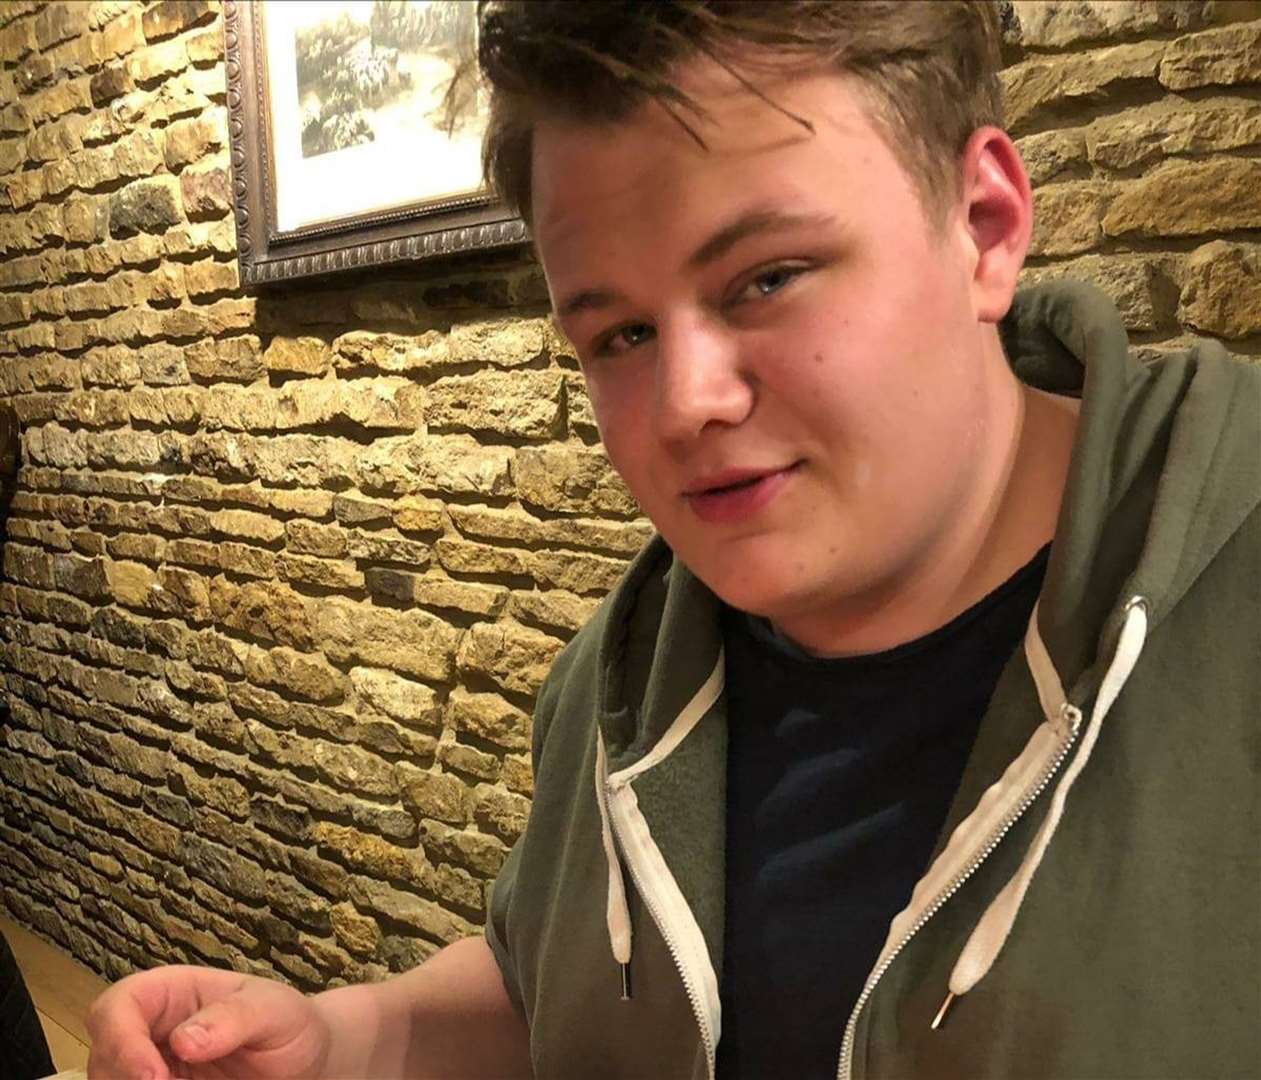 The case follows the 2019 crash which resulted in the death of teenage motorcyclist Harry Dunn (Family handout/PA)